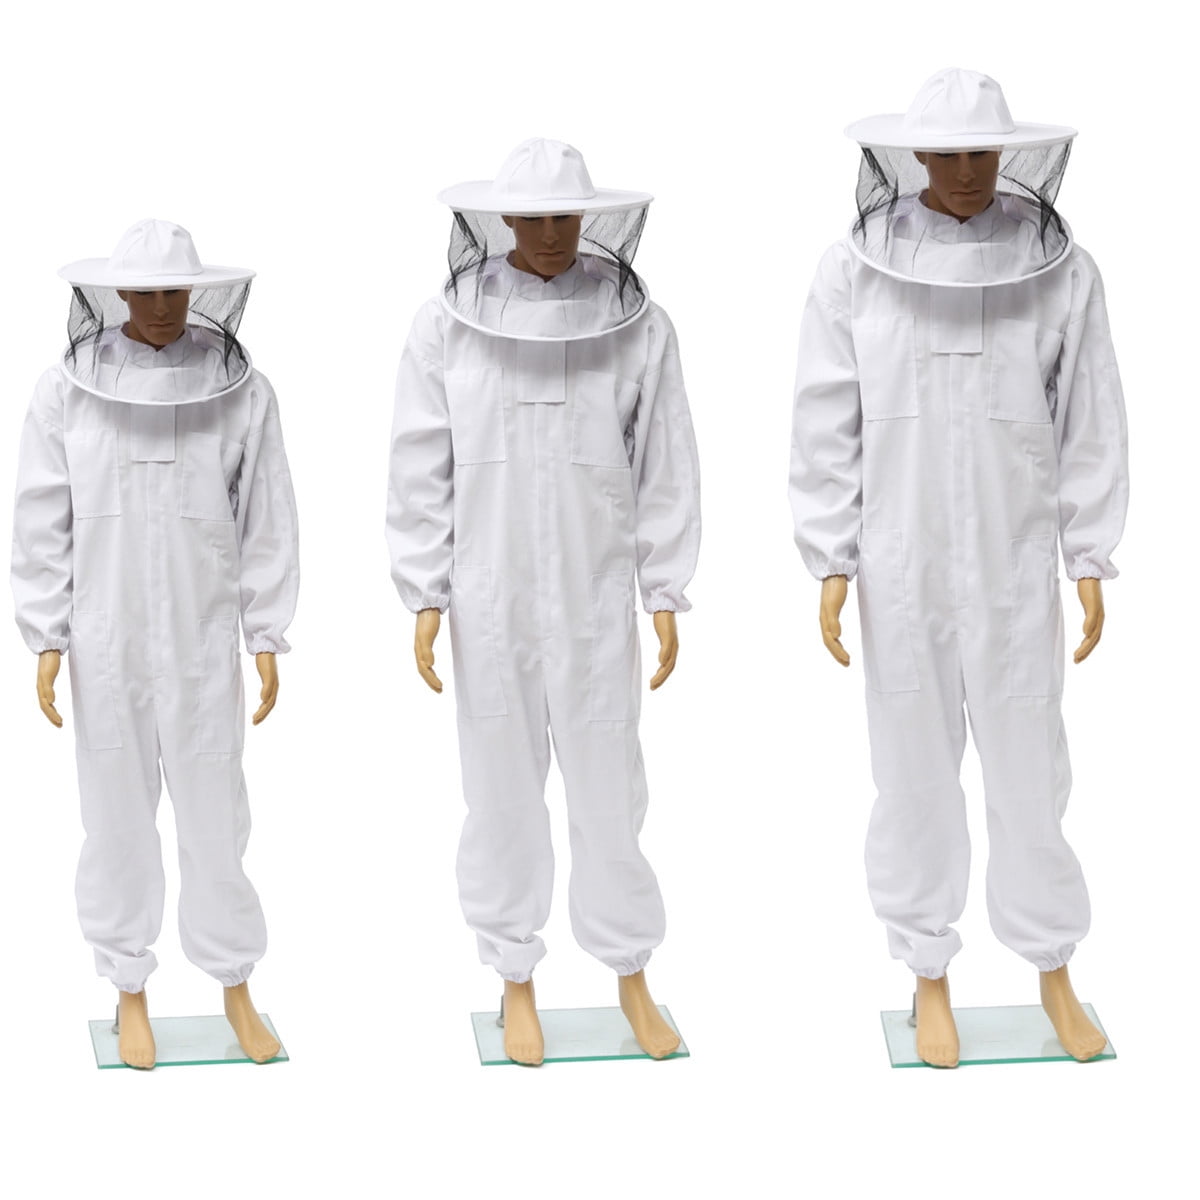 Beekeeping Suit Veil Hood Hat Clothes Professional Full Body High Quality Cotton 260 GSM Bee Keeper Protective Suit XL, Cotton-Fancy-Veil Bee Keeping Costume Equipment tools Jacket Coat Trouser